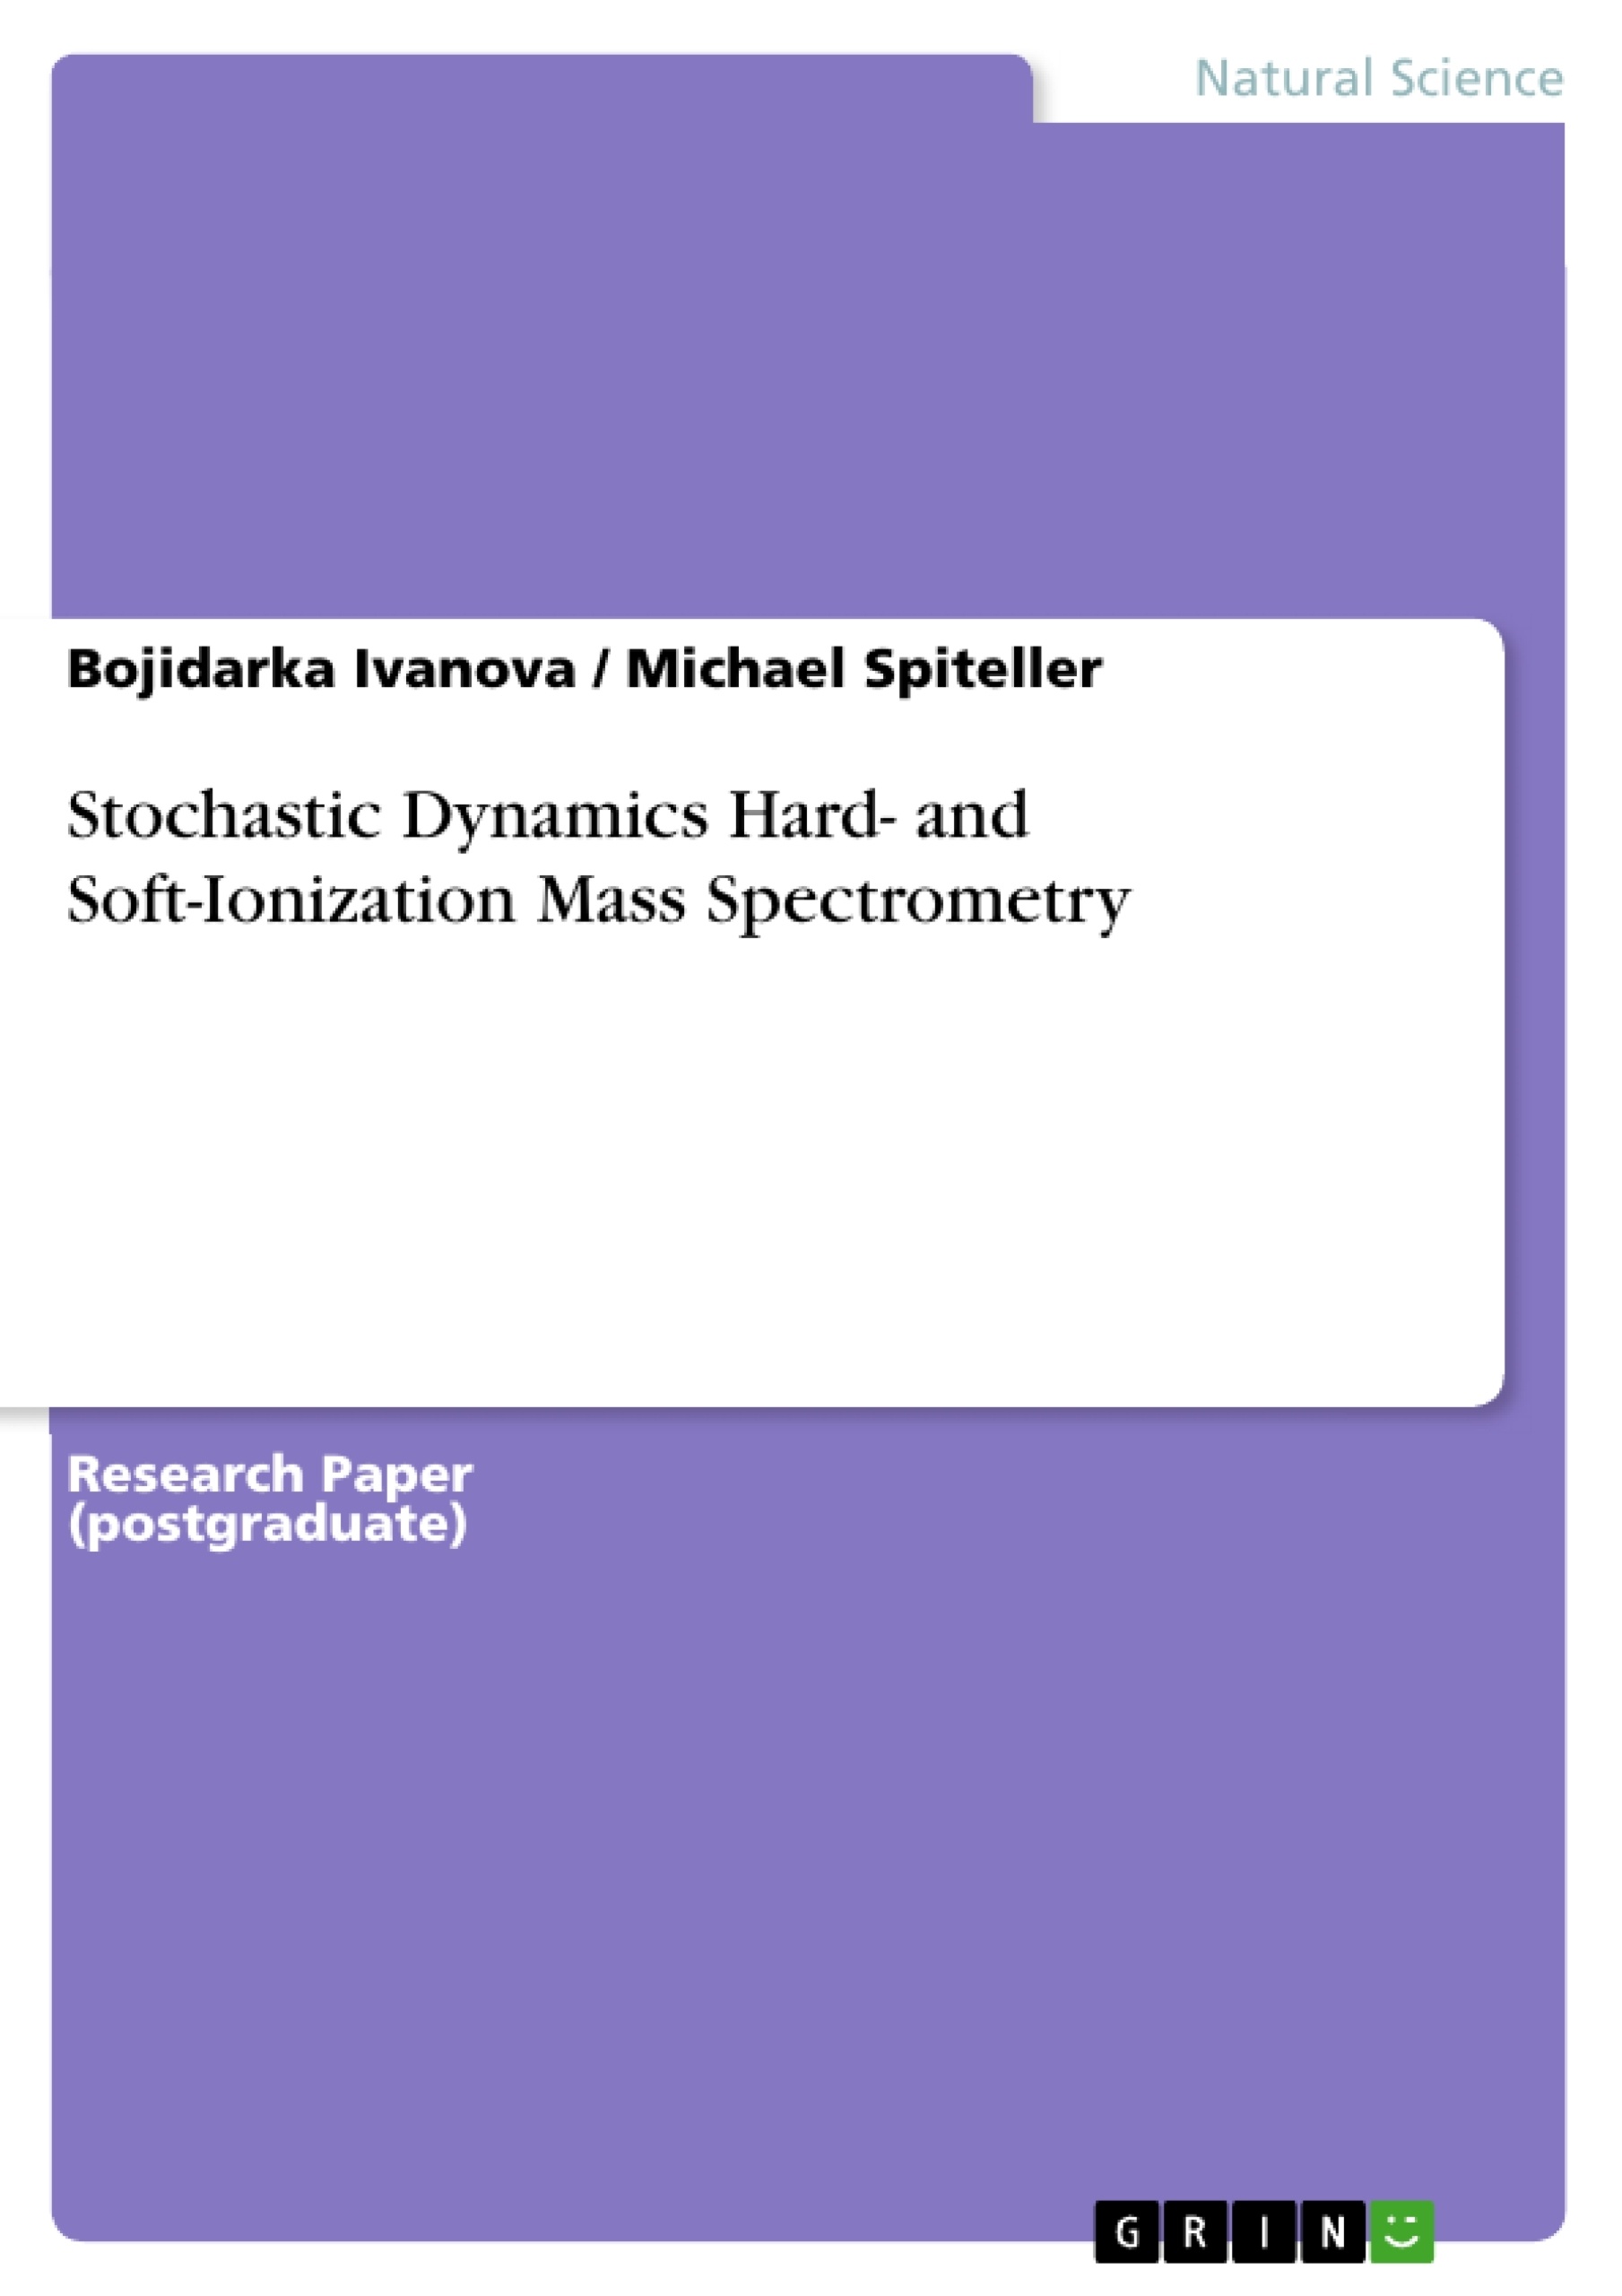 Title: Stochastic Dynamics Hard- and Soft-Ionization Mass Spectrometry